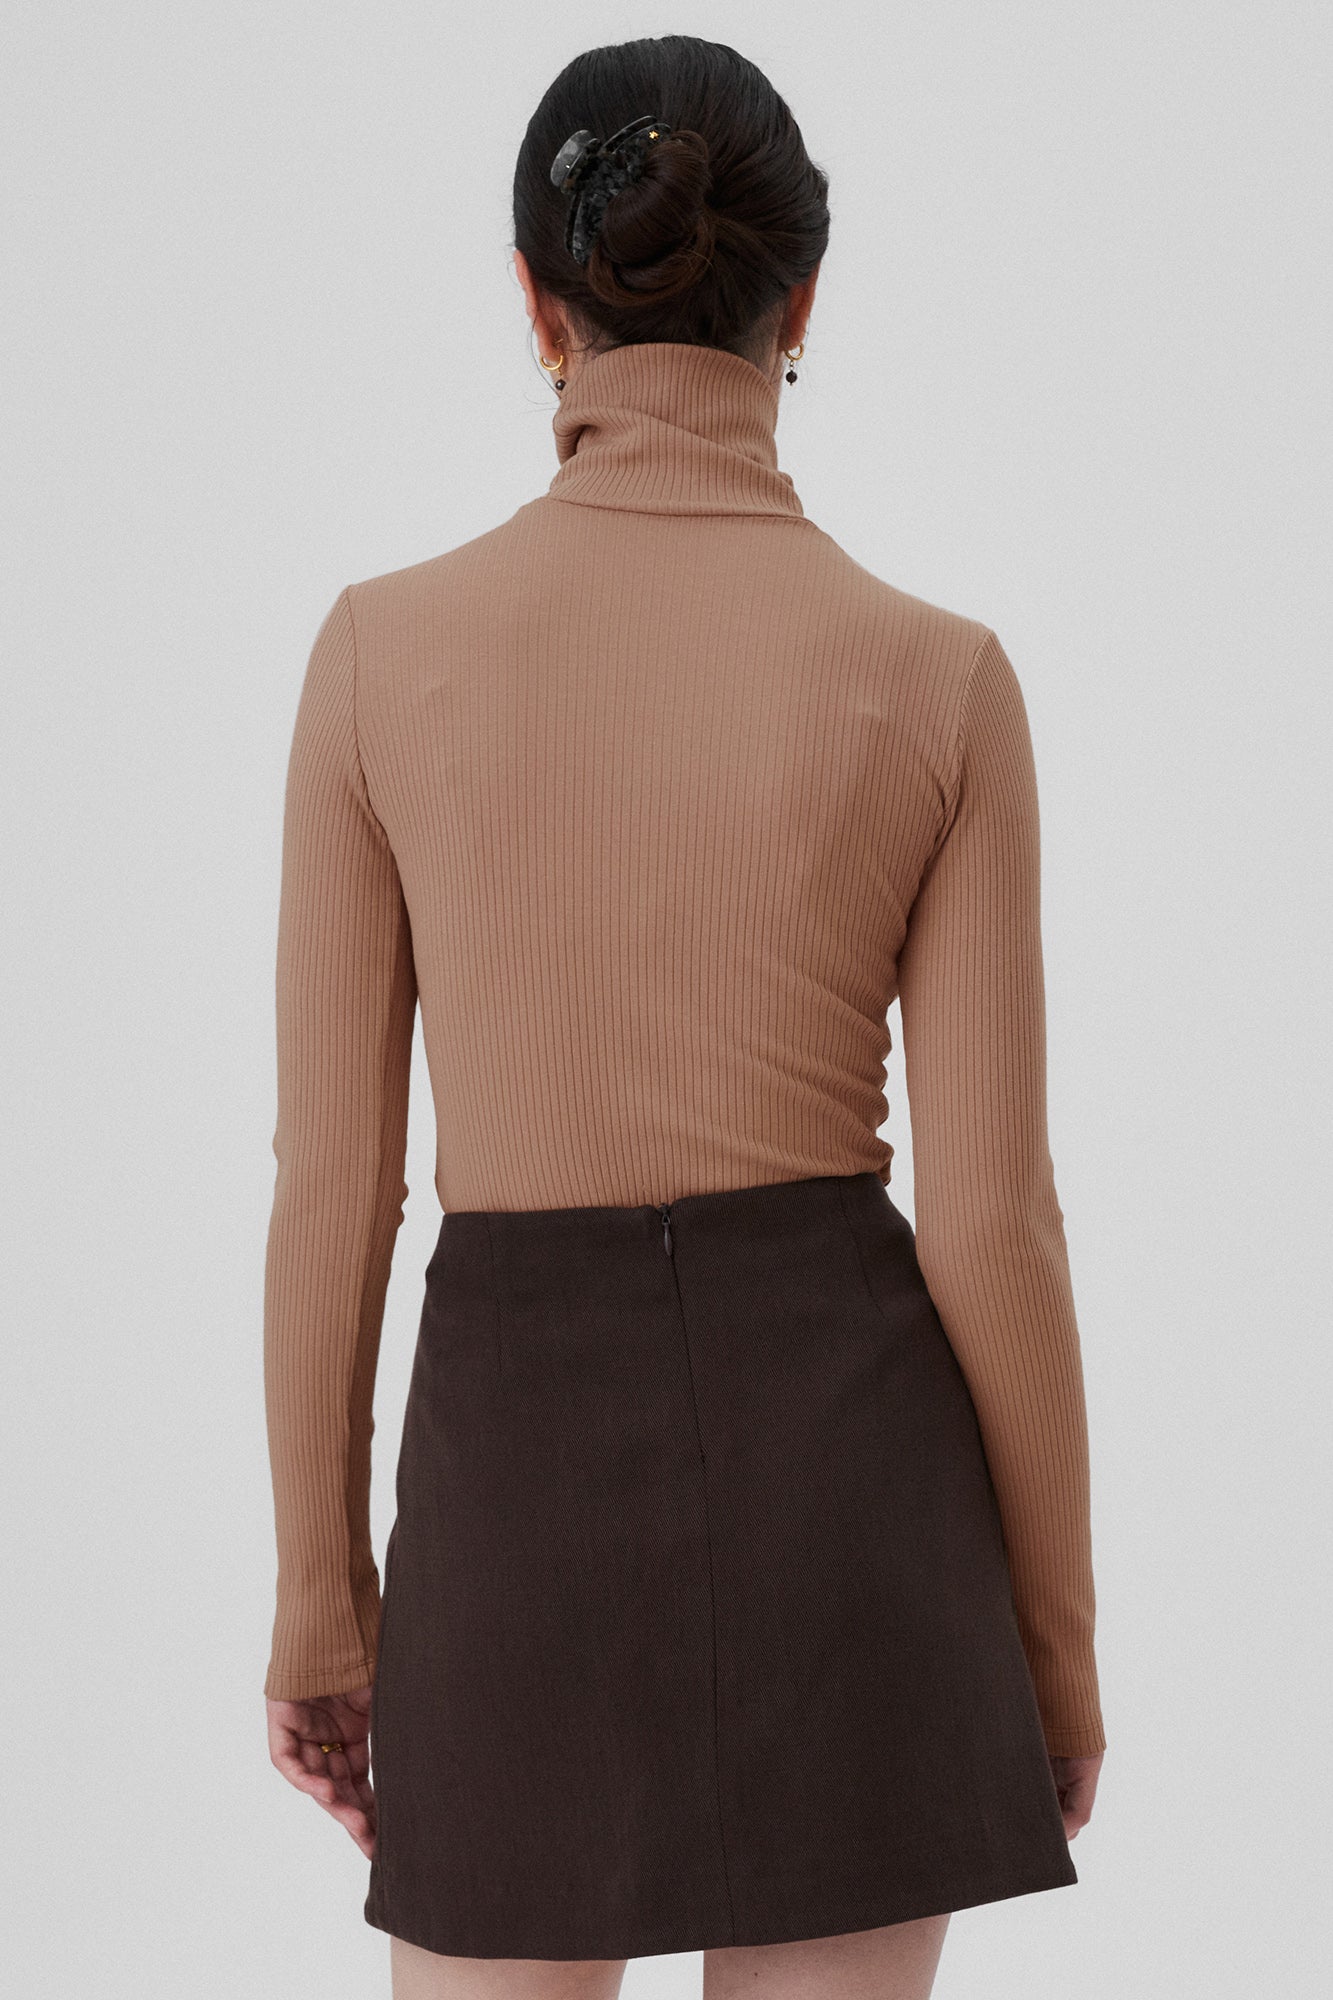 Turtleneck in organic cotton / 15 / 02 / coffee cream *tencel-skirt-07-02-dark-chocolate* ?The model is 172cm tall and wears size XS? |